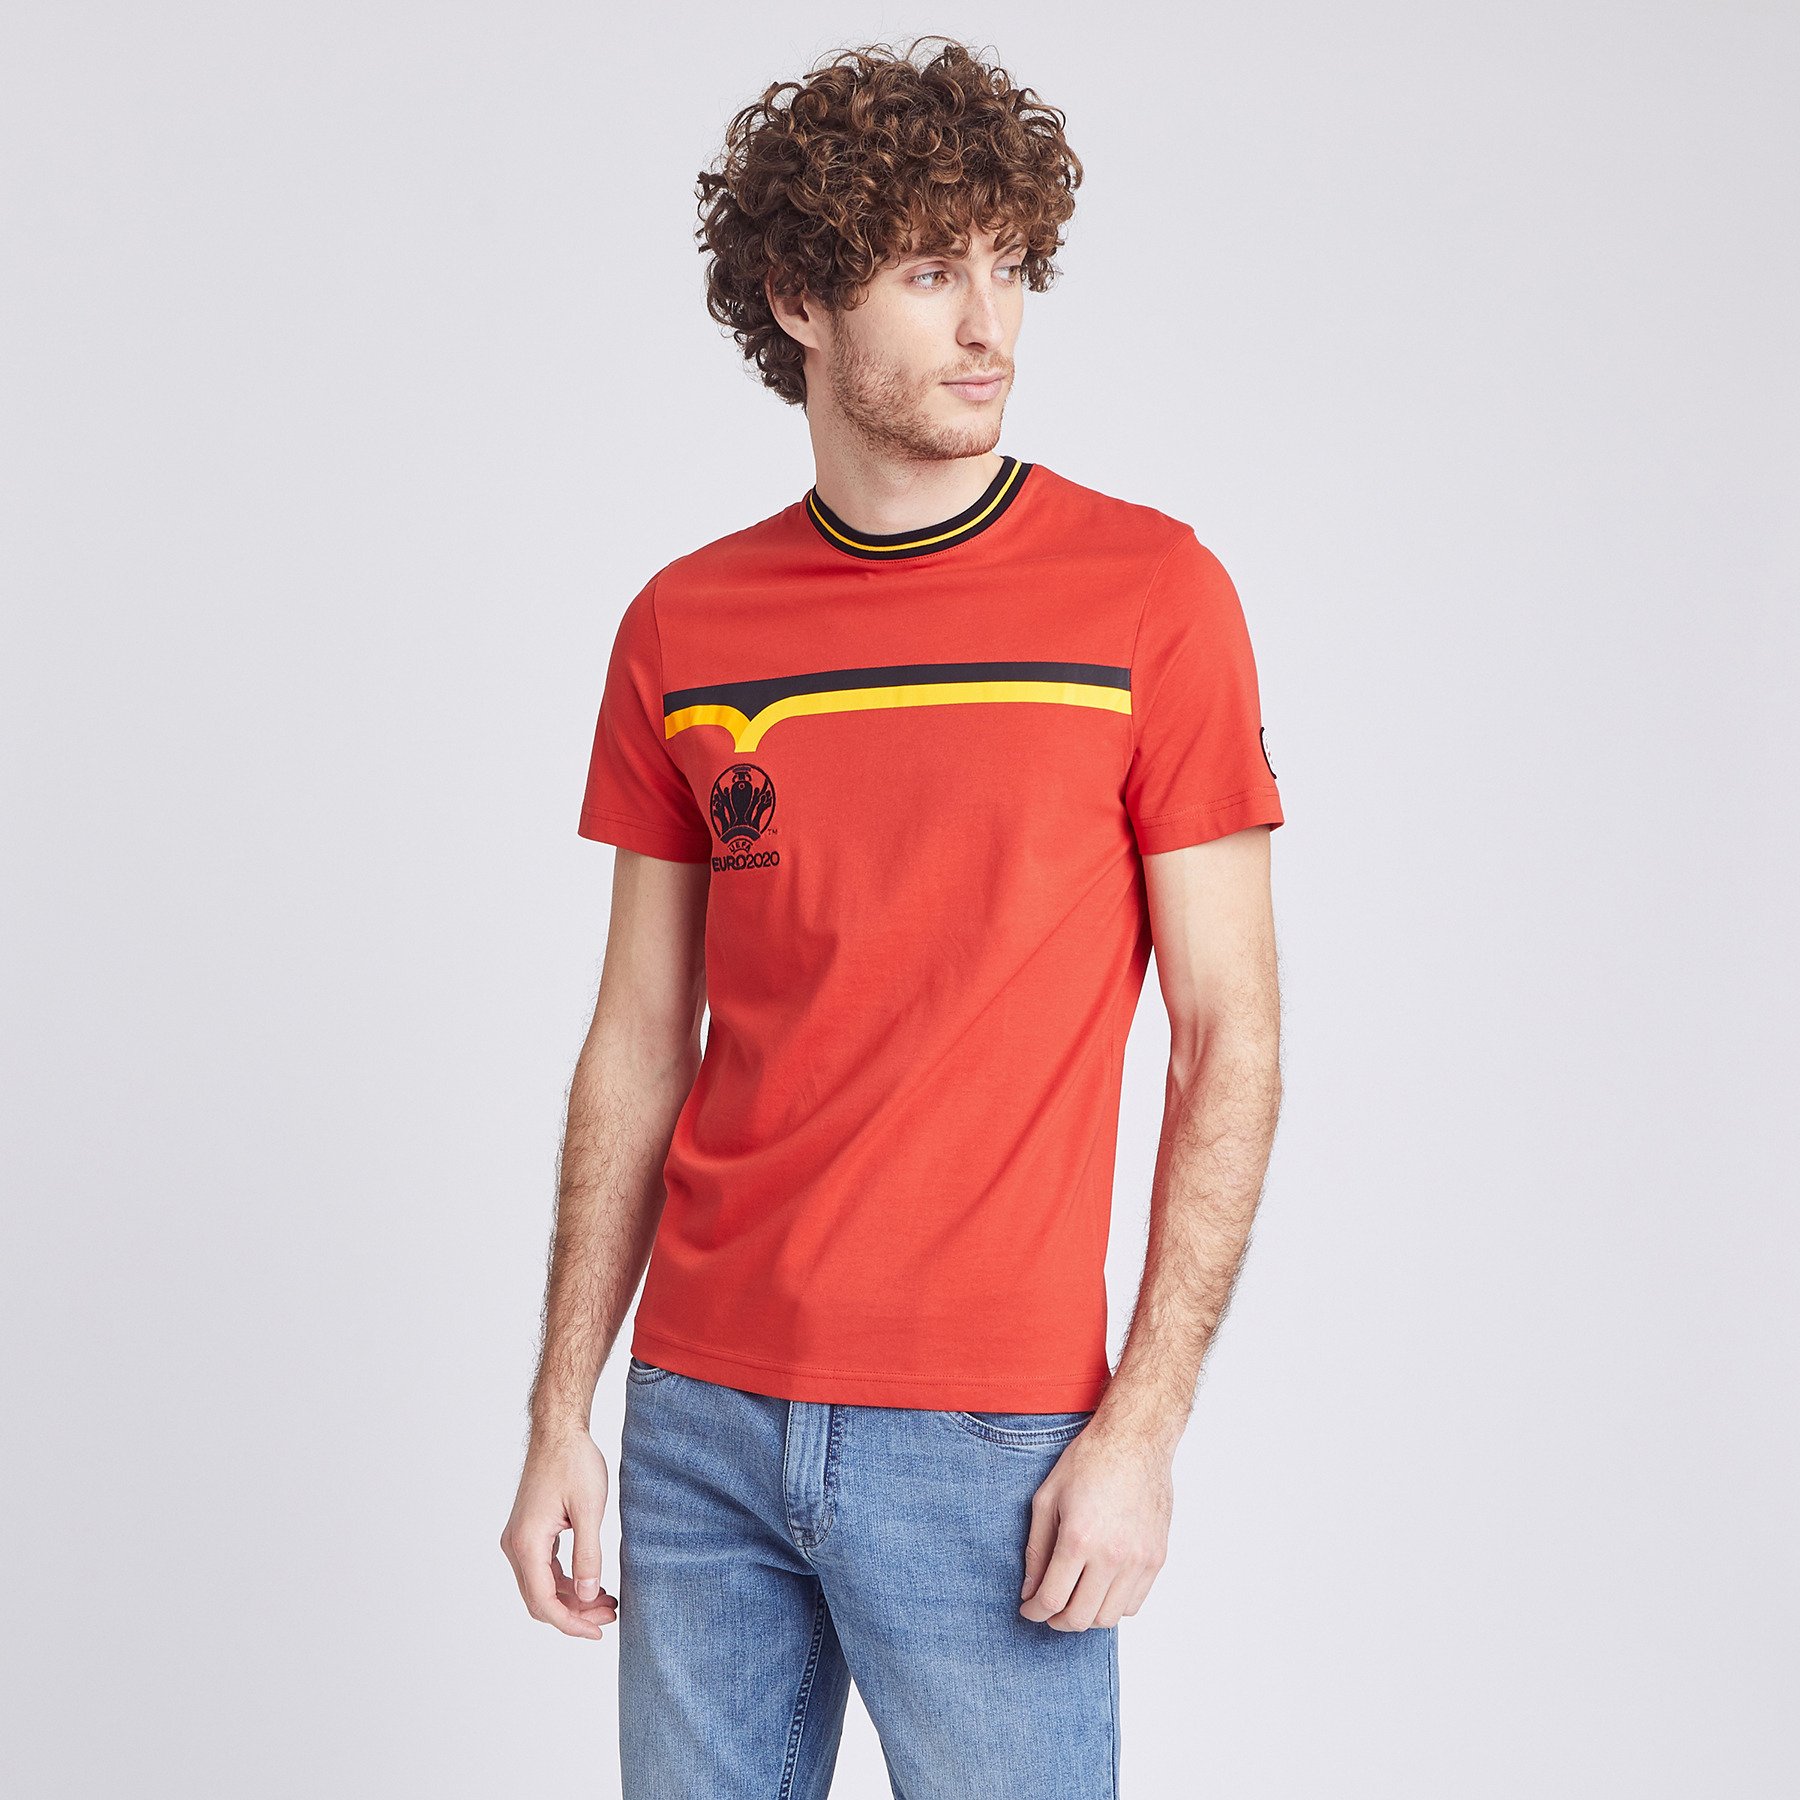 Tee-shirt sous licence officielle UEFA EURO 2020 B Rouge Homme